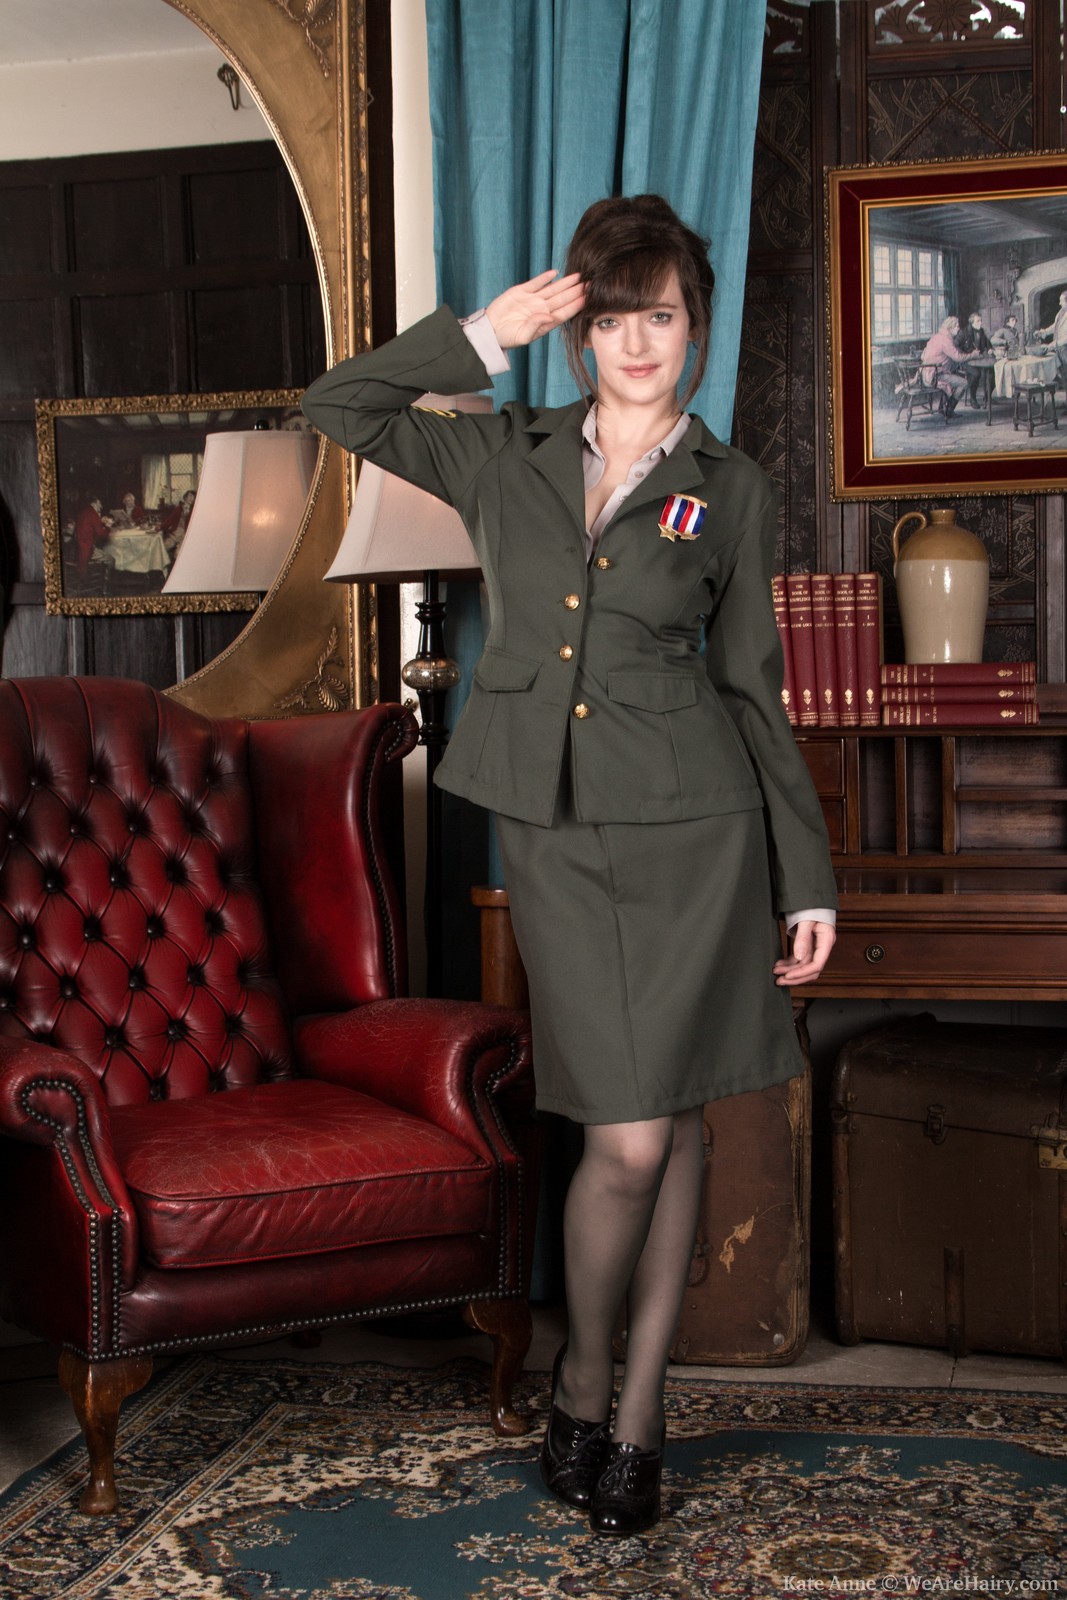 Kate Anne strips from her military uniform